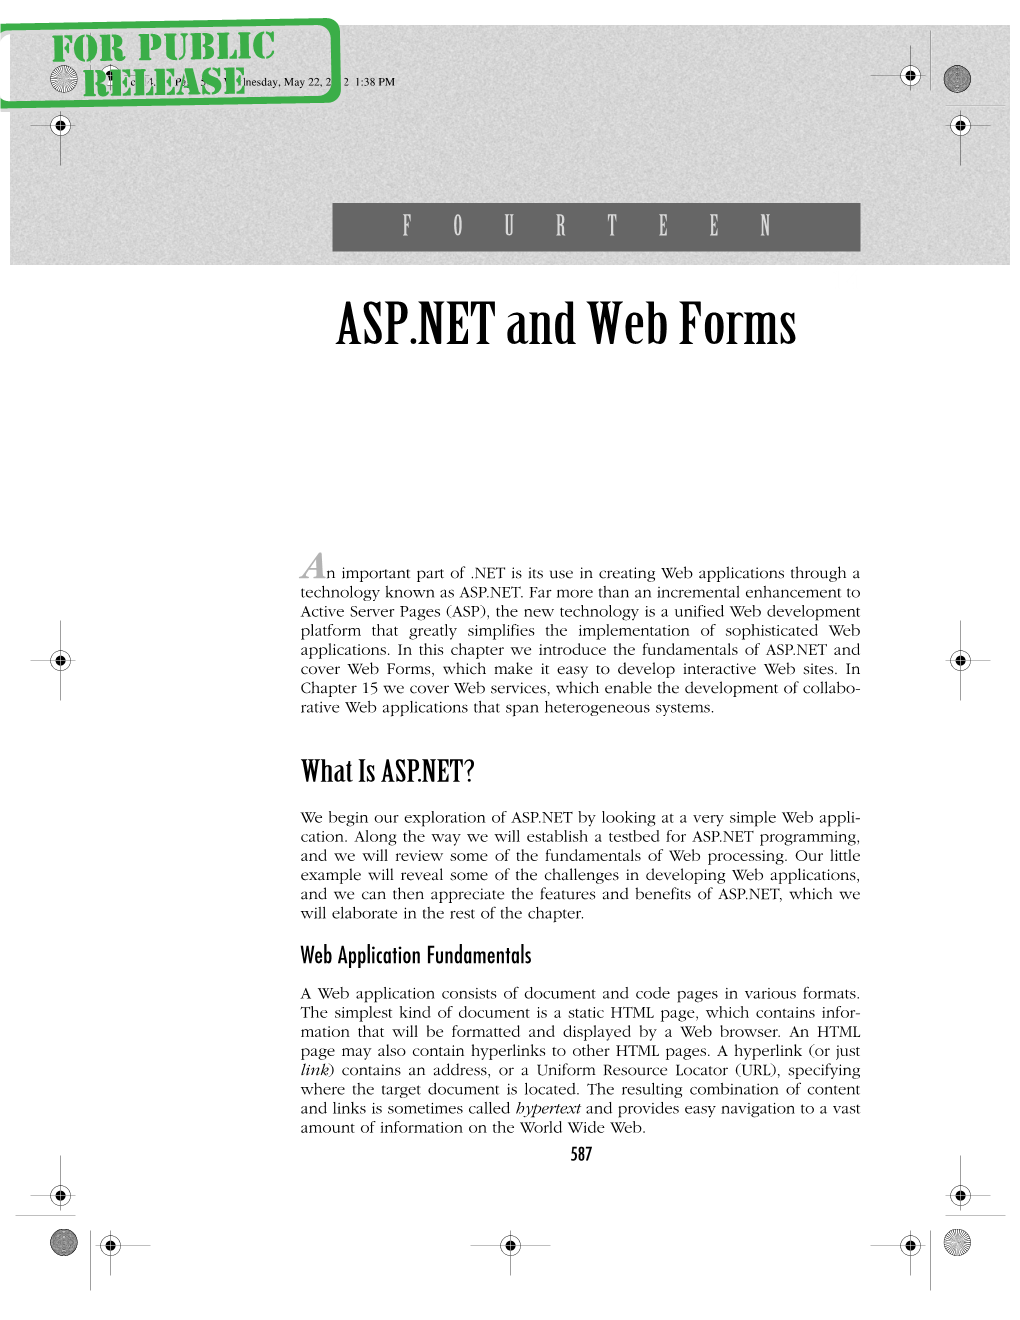 ASP.NET and Web Forms